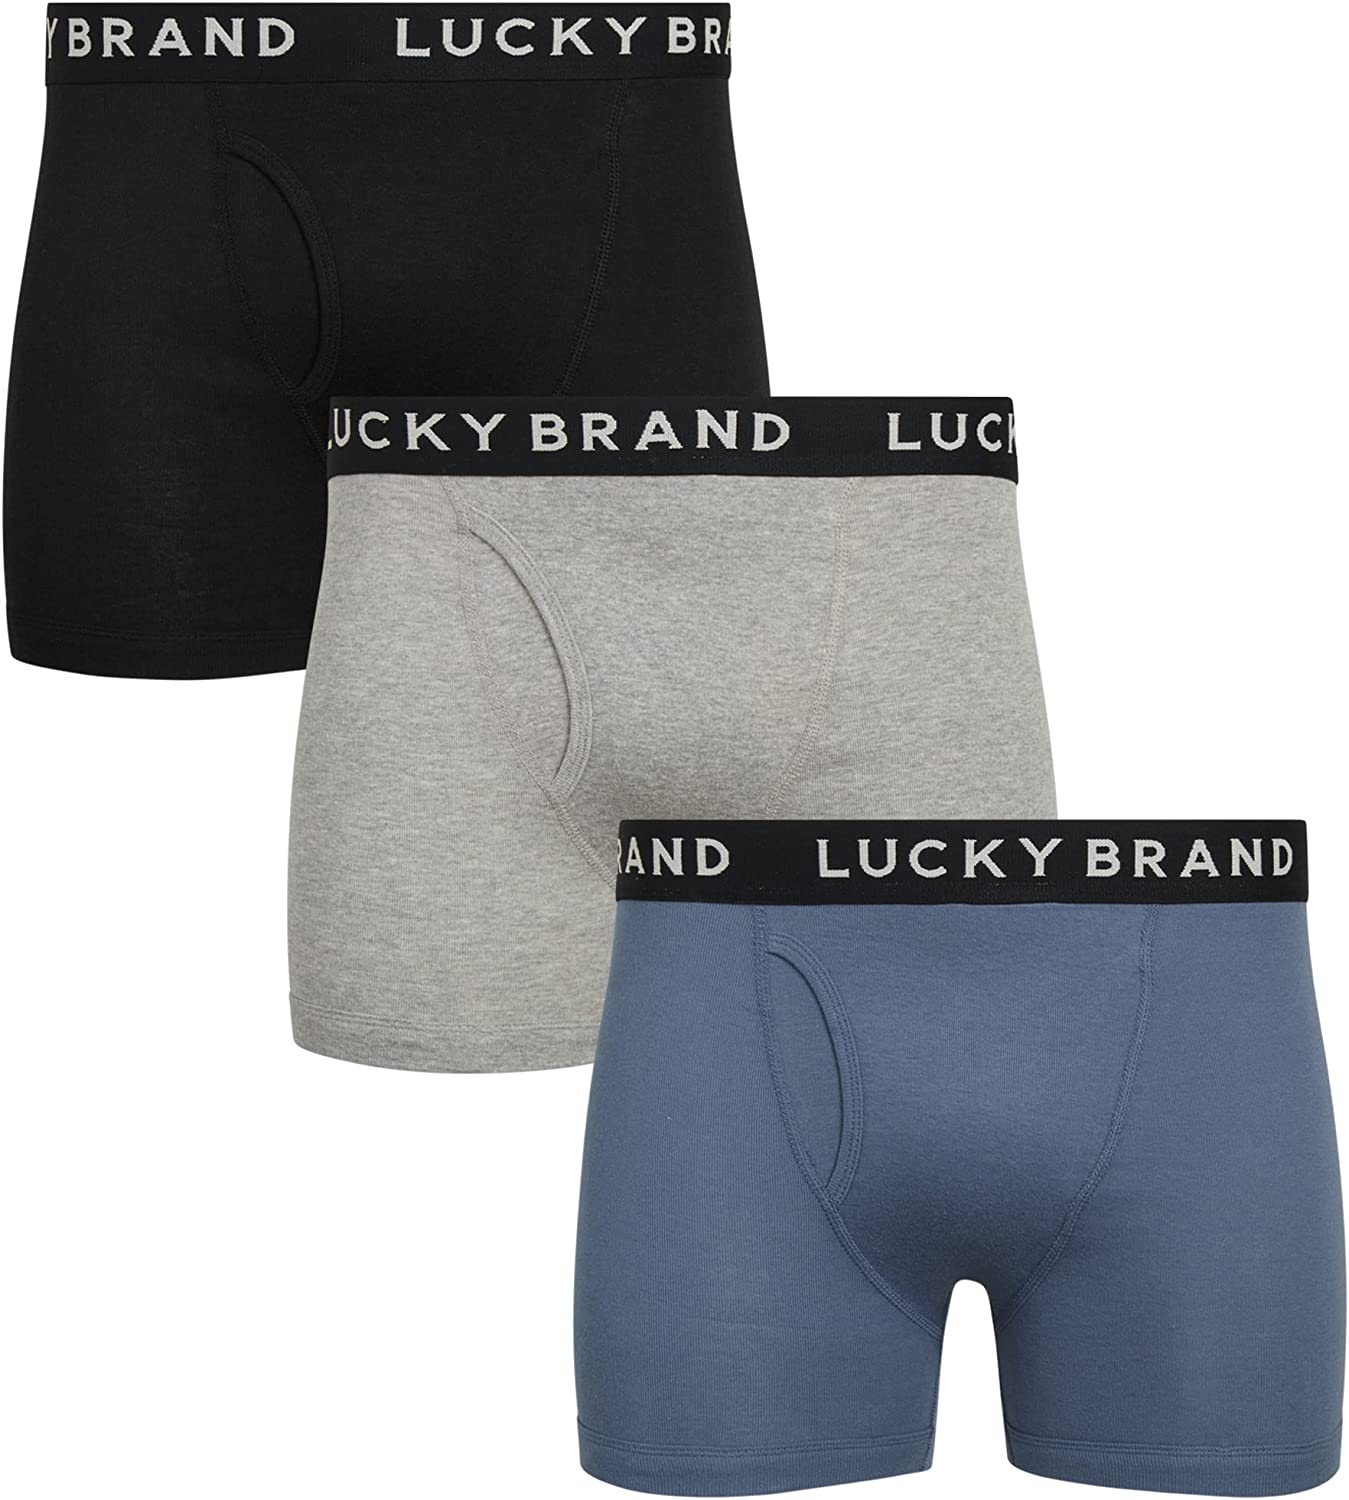 Lucky Brand 3-Pack Boxer Briefs